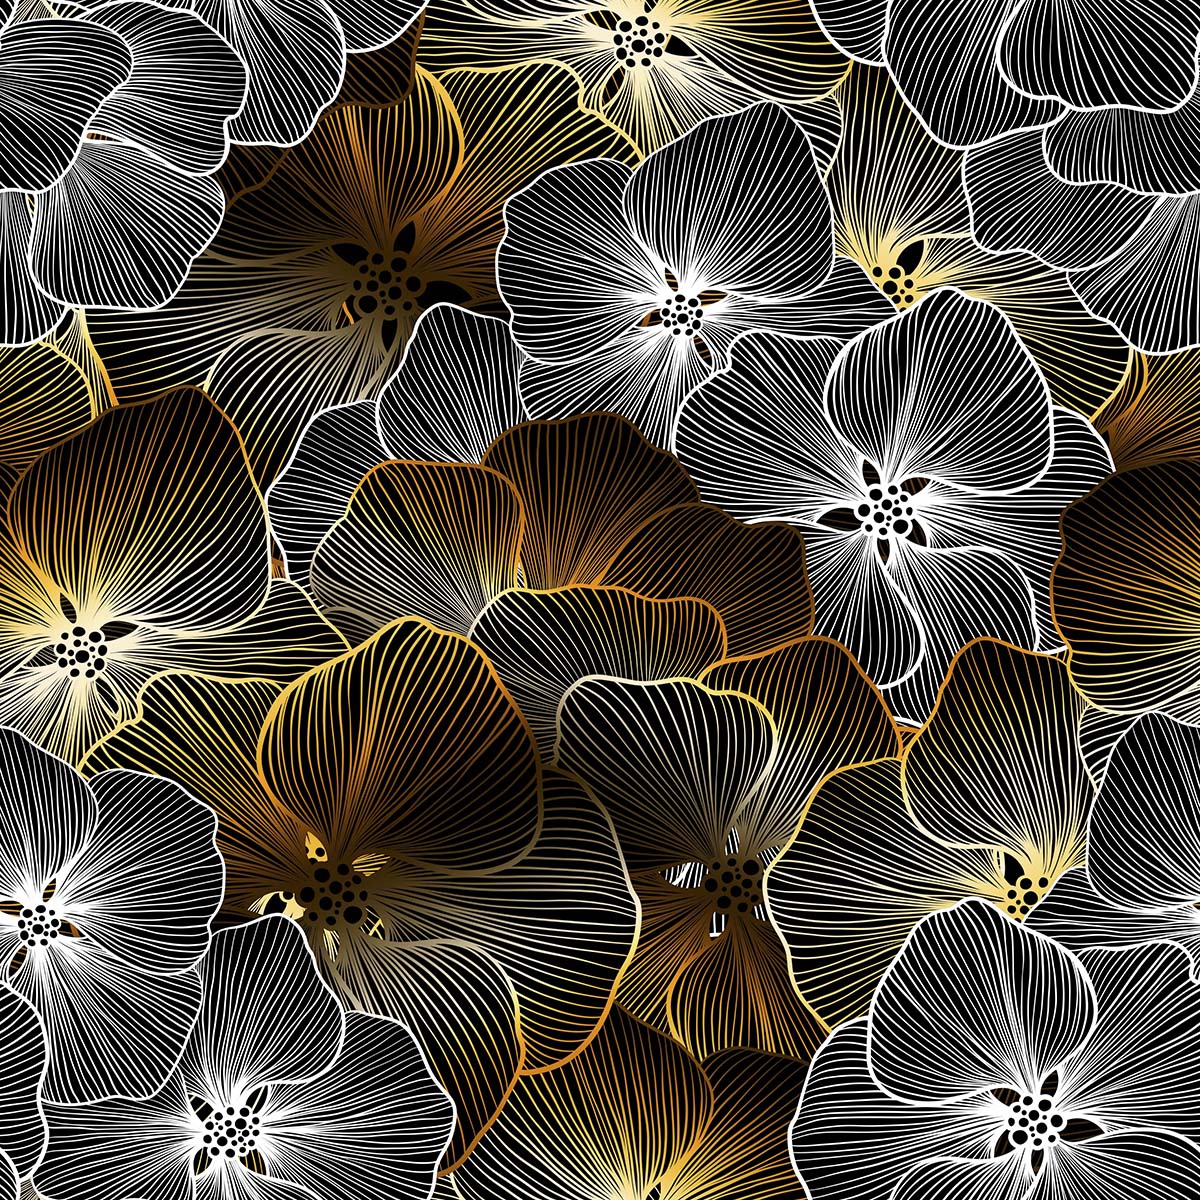 A group of flowers with lines